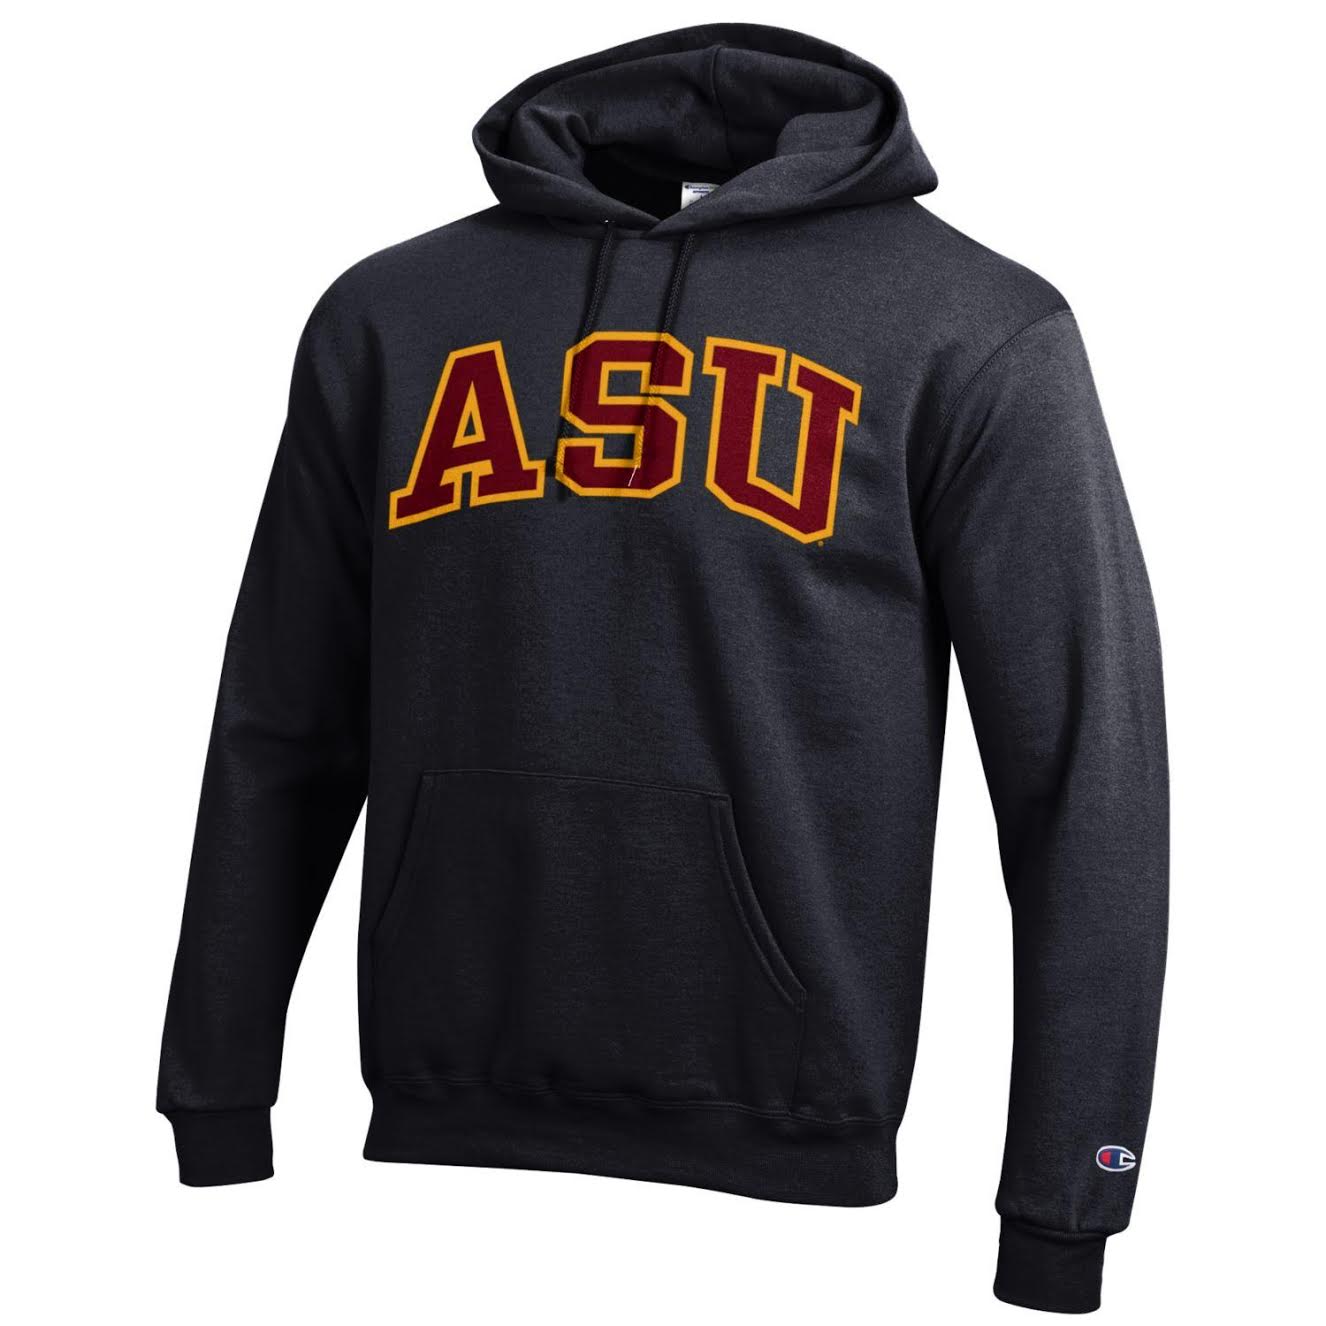 ASU black champion hoodie with ASU stitched across chest in maroon and gold.